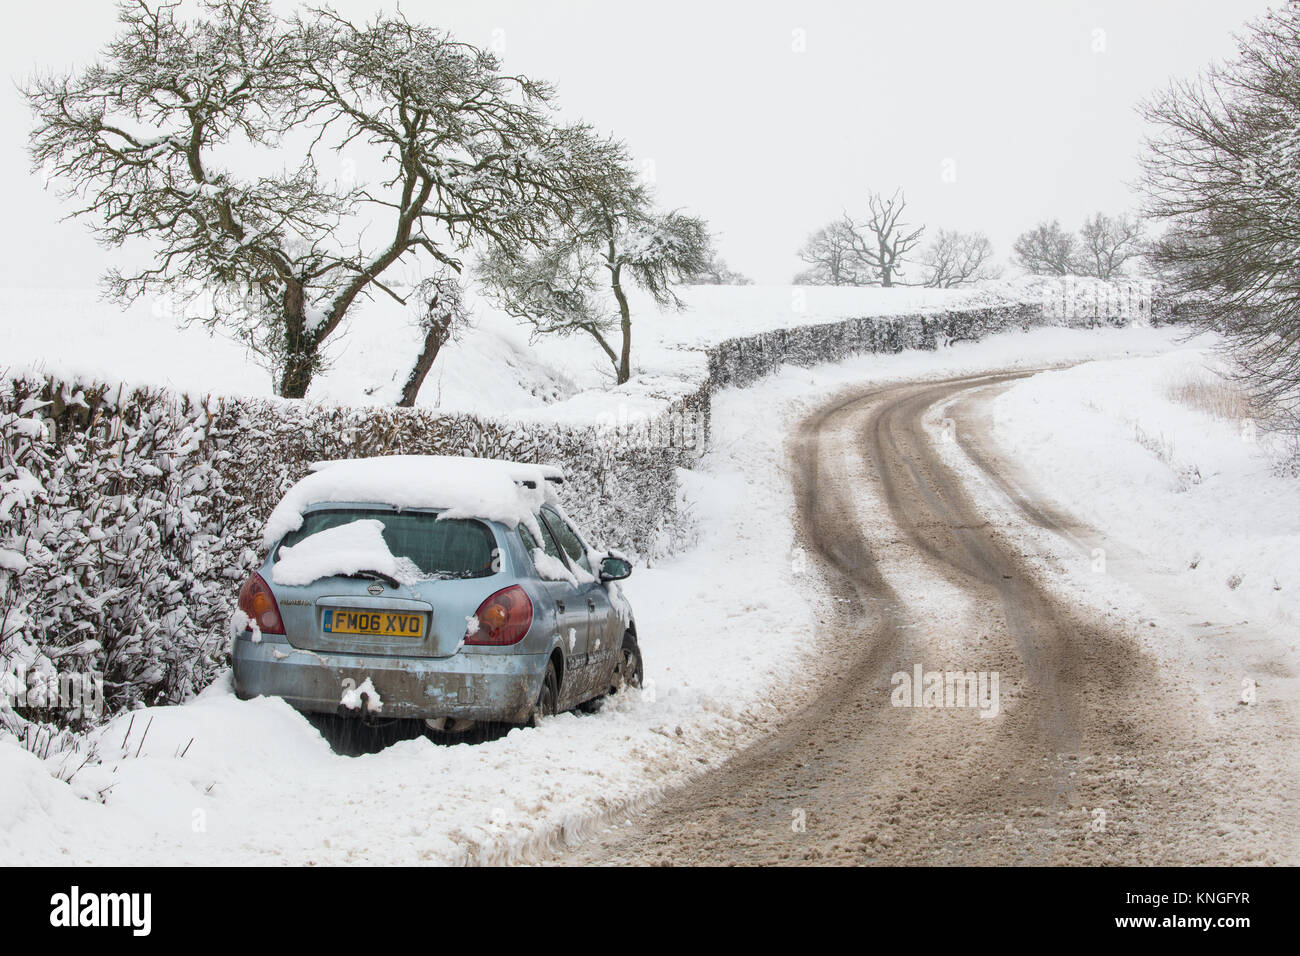 Abandoned car in rural Herefordshire, where heavy, early snow caused significant transport issues in an area with no public transport. December 2017. Stock Photo